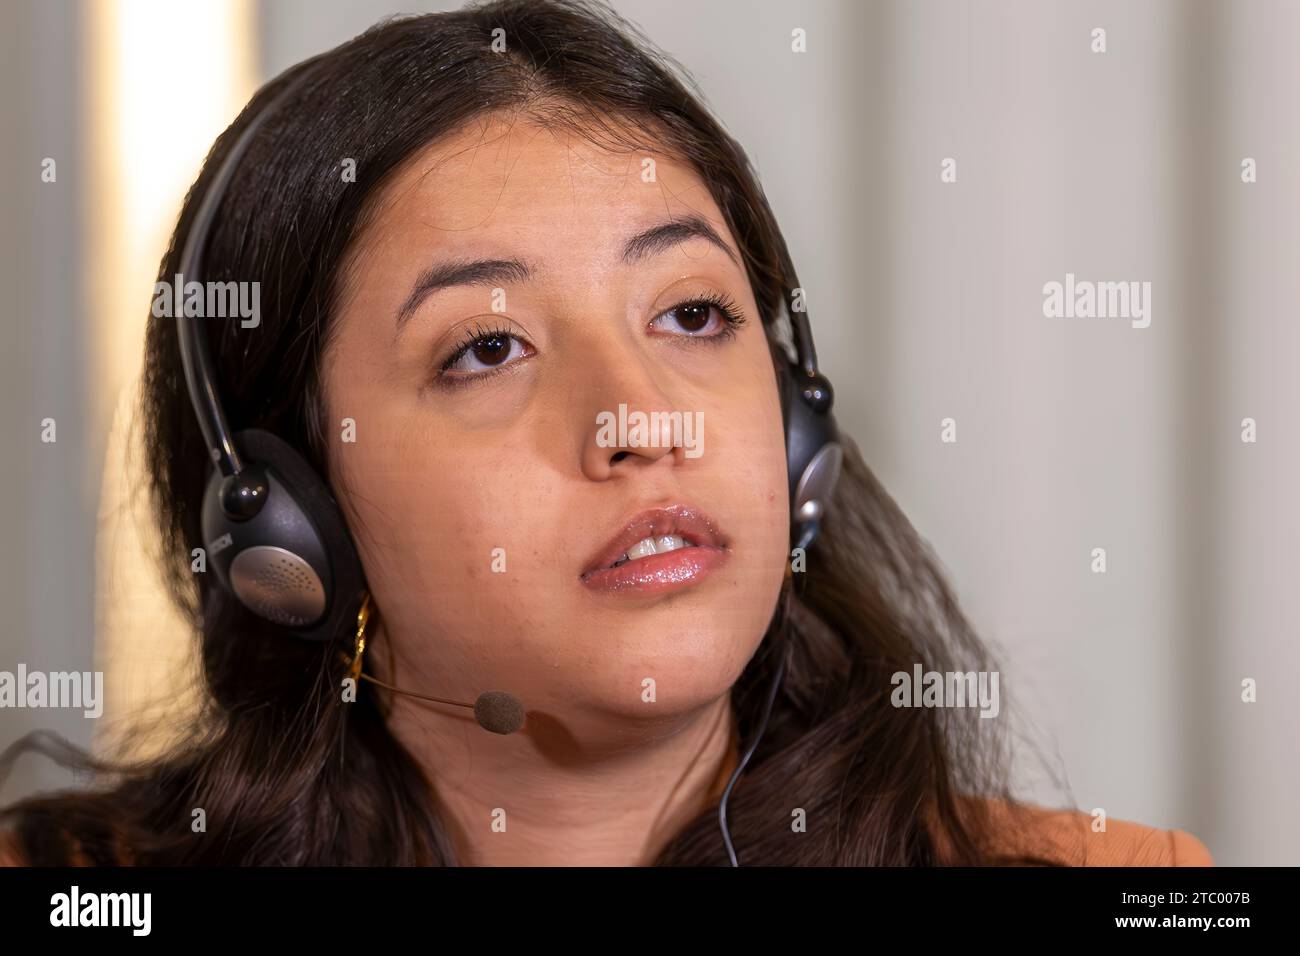 Oslo, Norway 09 December 2023 Riana Rahmani the daughter of this years Nobel Peace Prize Winner Narges Mohammadi of Iran, speaks during the press conference. Her mother is in prison in Iran and her daughter is representing her at the press conference at the Norwegian Nobel Institute in Oslo Norway.credit: Nigel Waldron/Alamy Live News Stock Photo